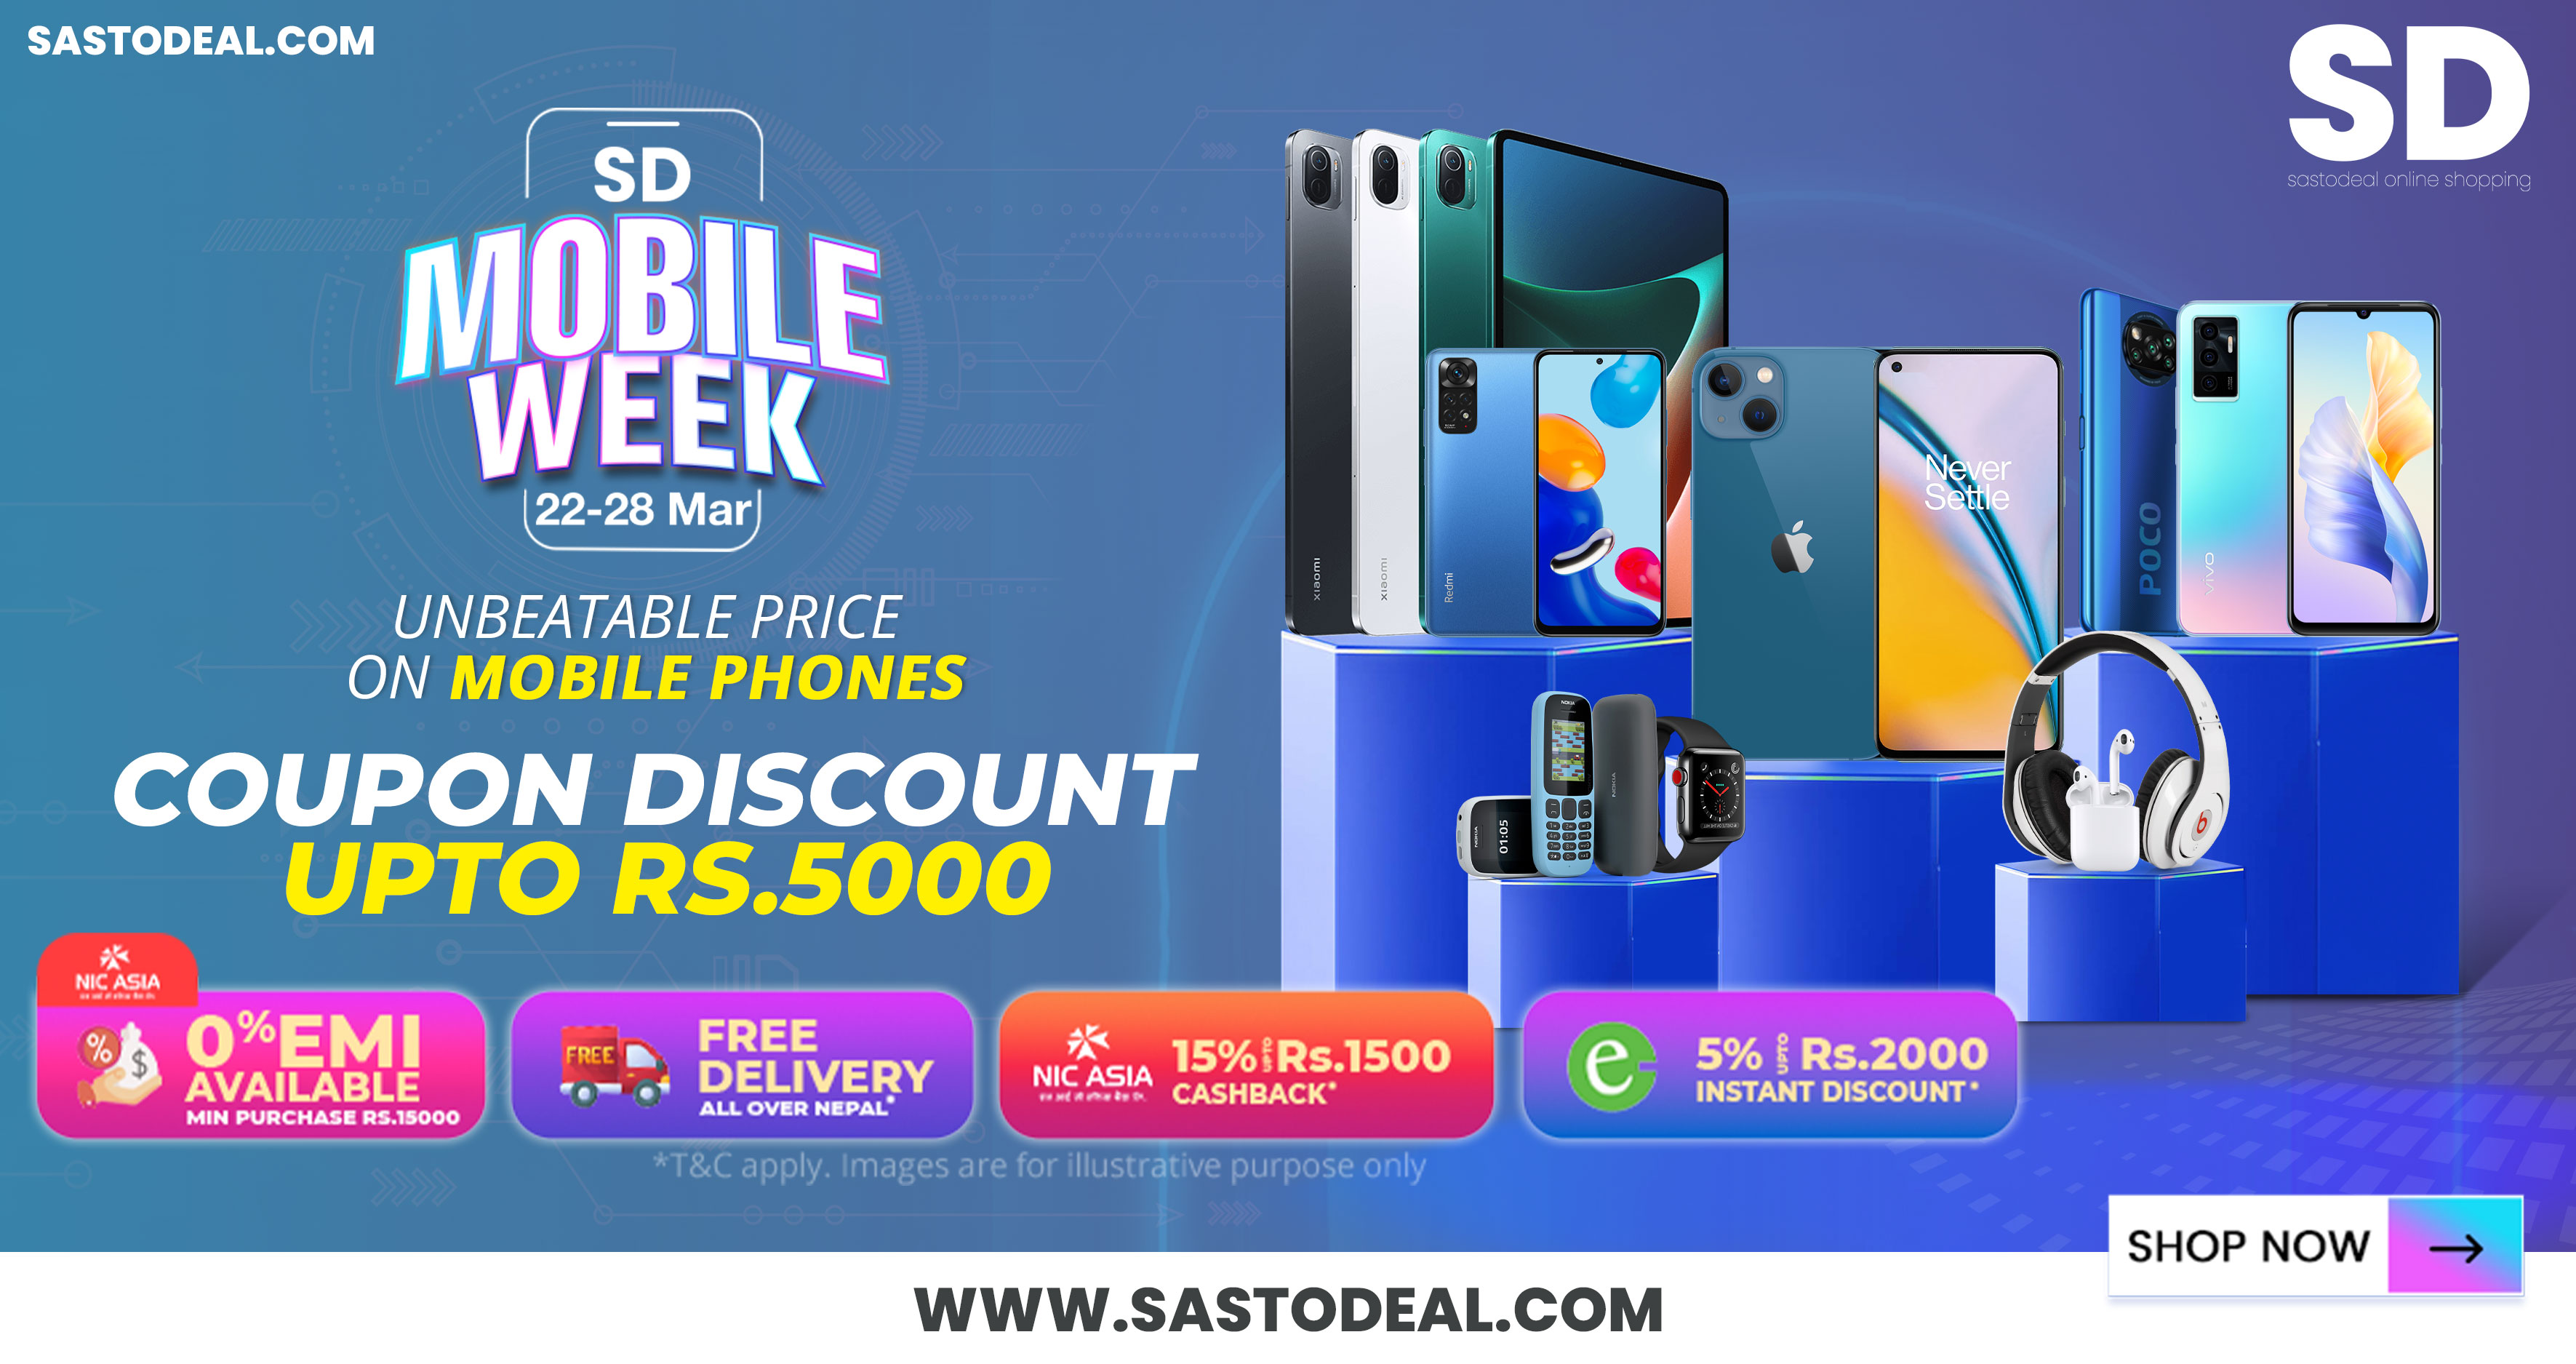 Sastodeal launches Mobile Week campaign